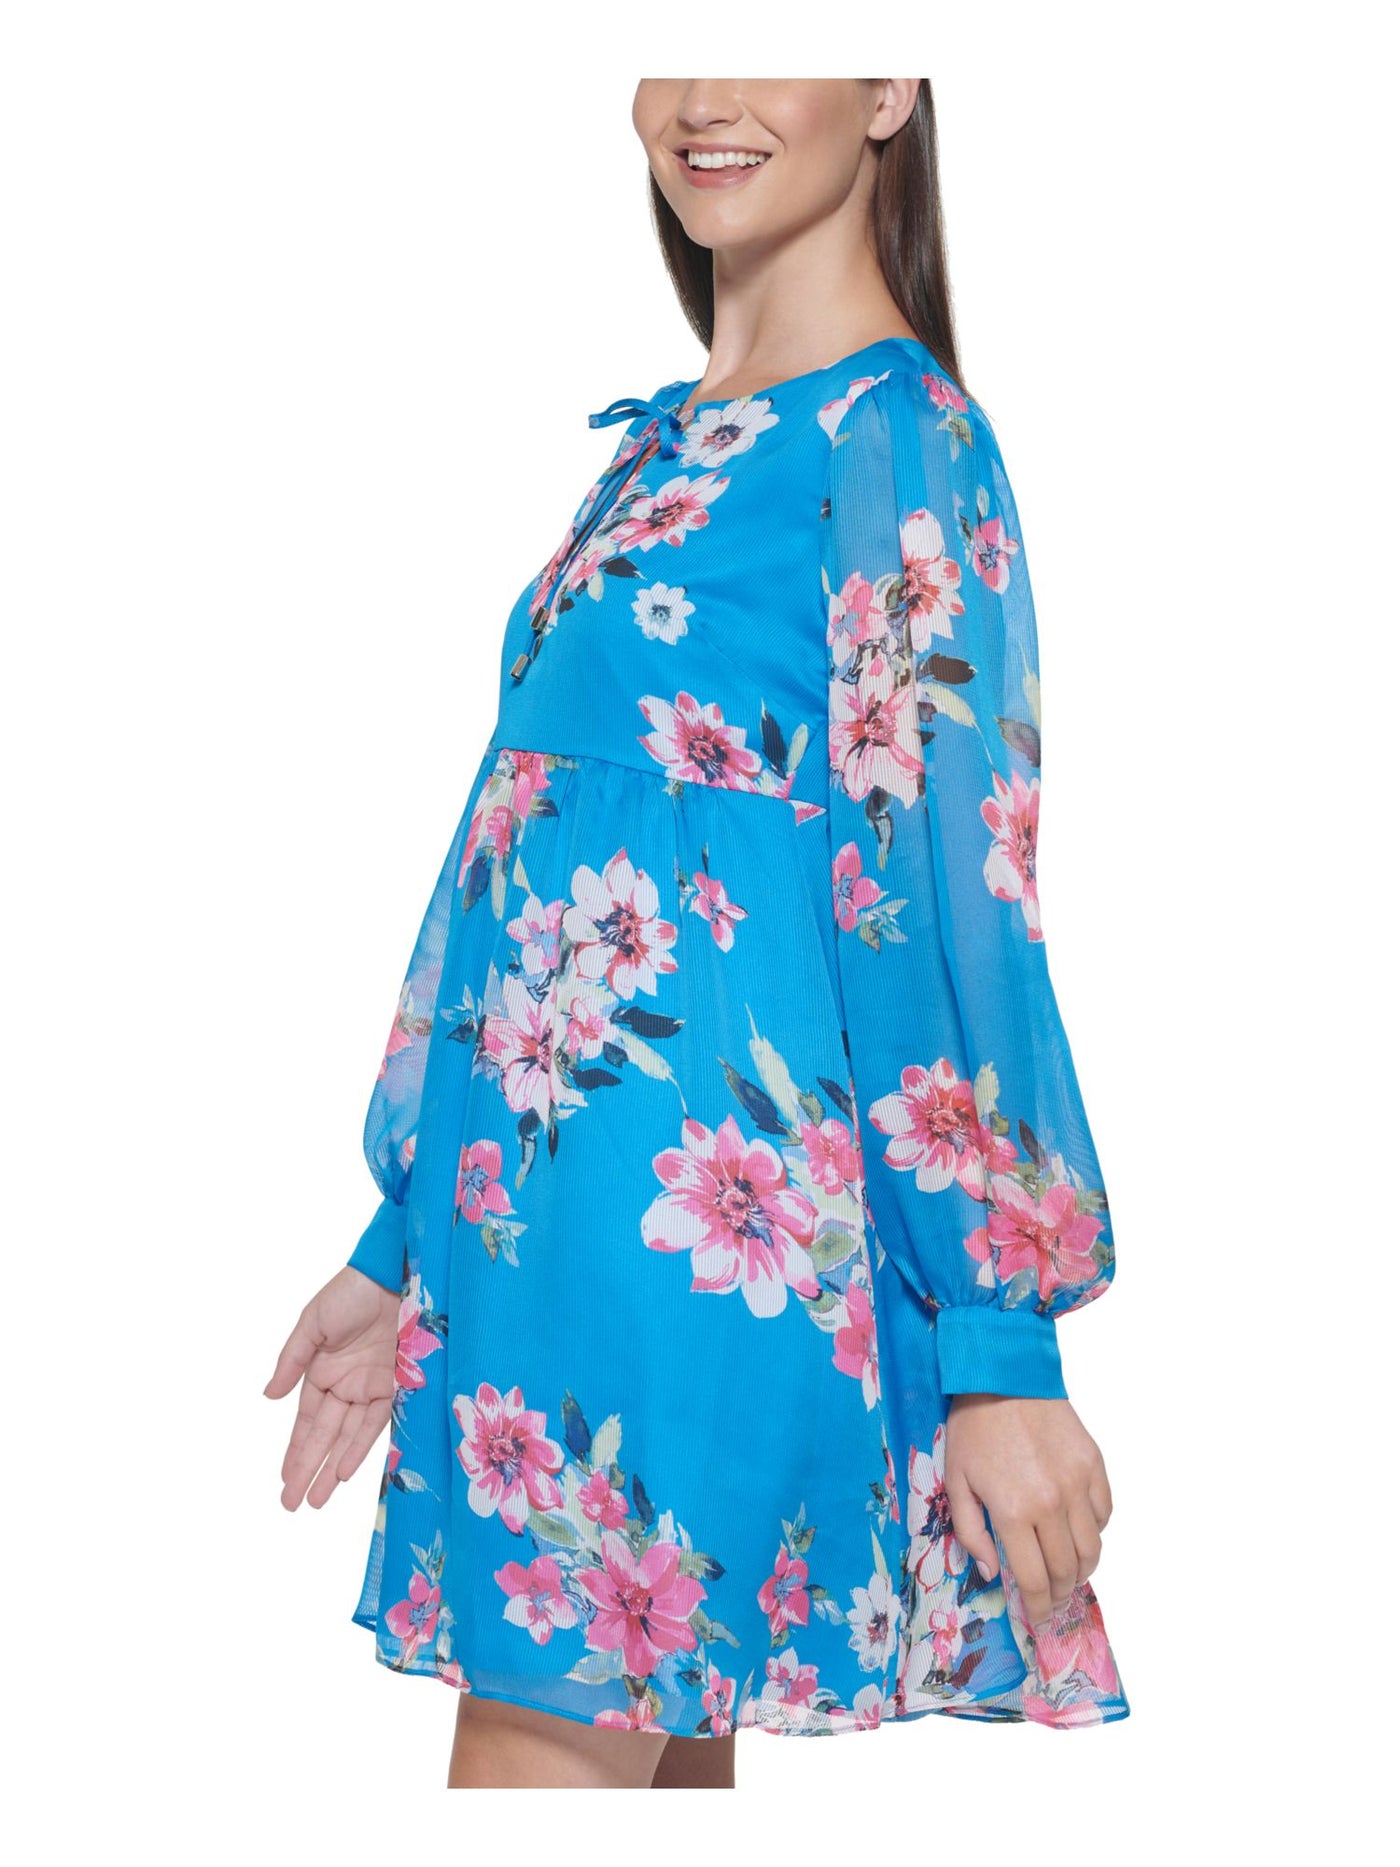 KENSIE Womens Blue Ribbed Lined Floral Cuffed Sleeve Tie Neck Above The Knee Party Shift Dress 2